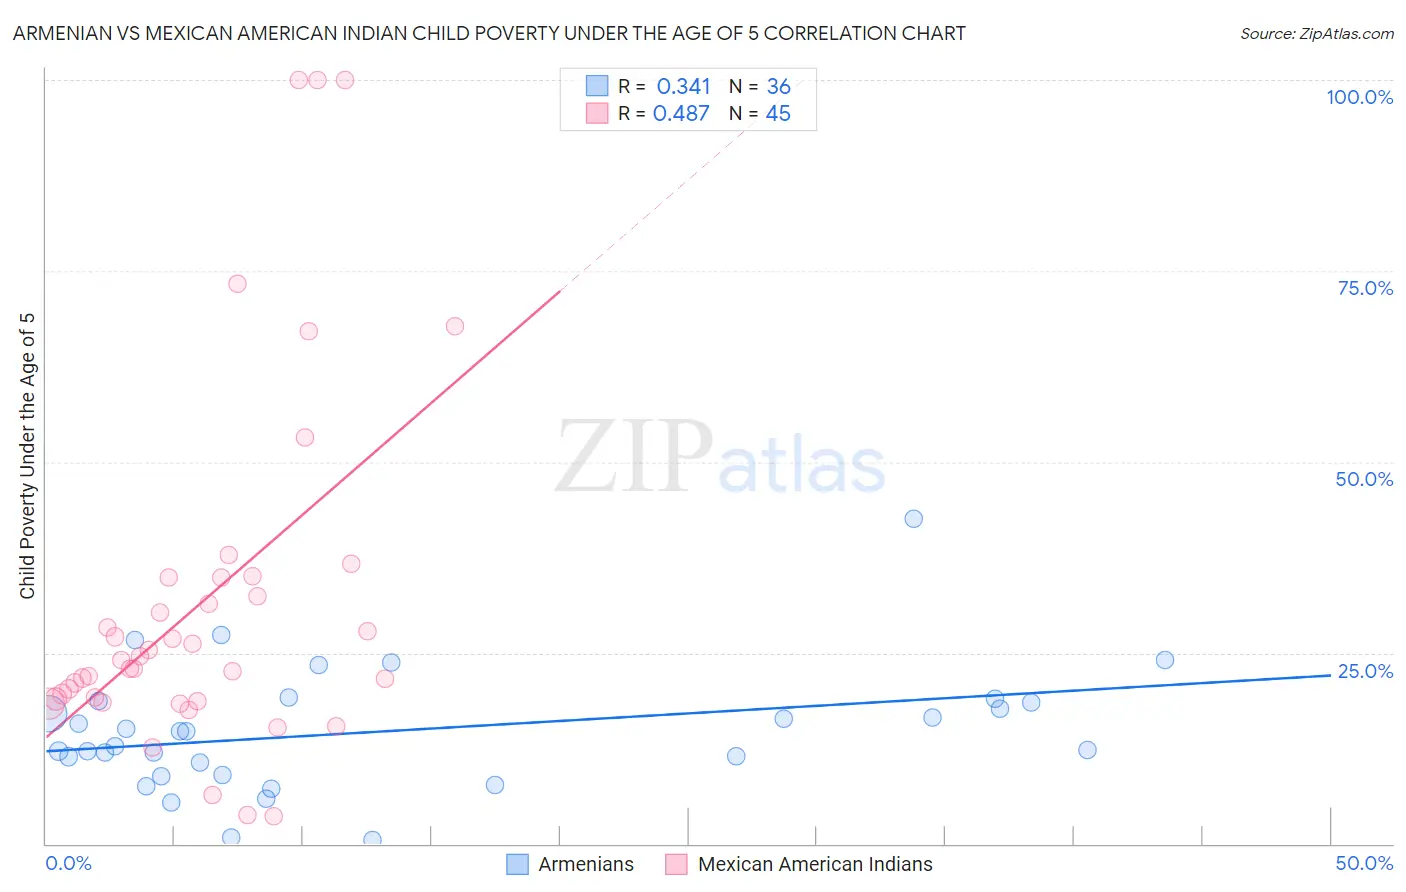 Armenian vs Mexican American Indian Child Poverty Under the Age of 5